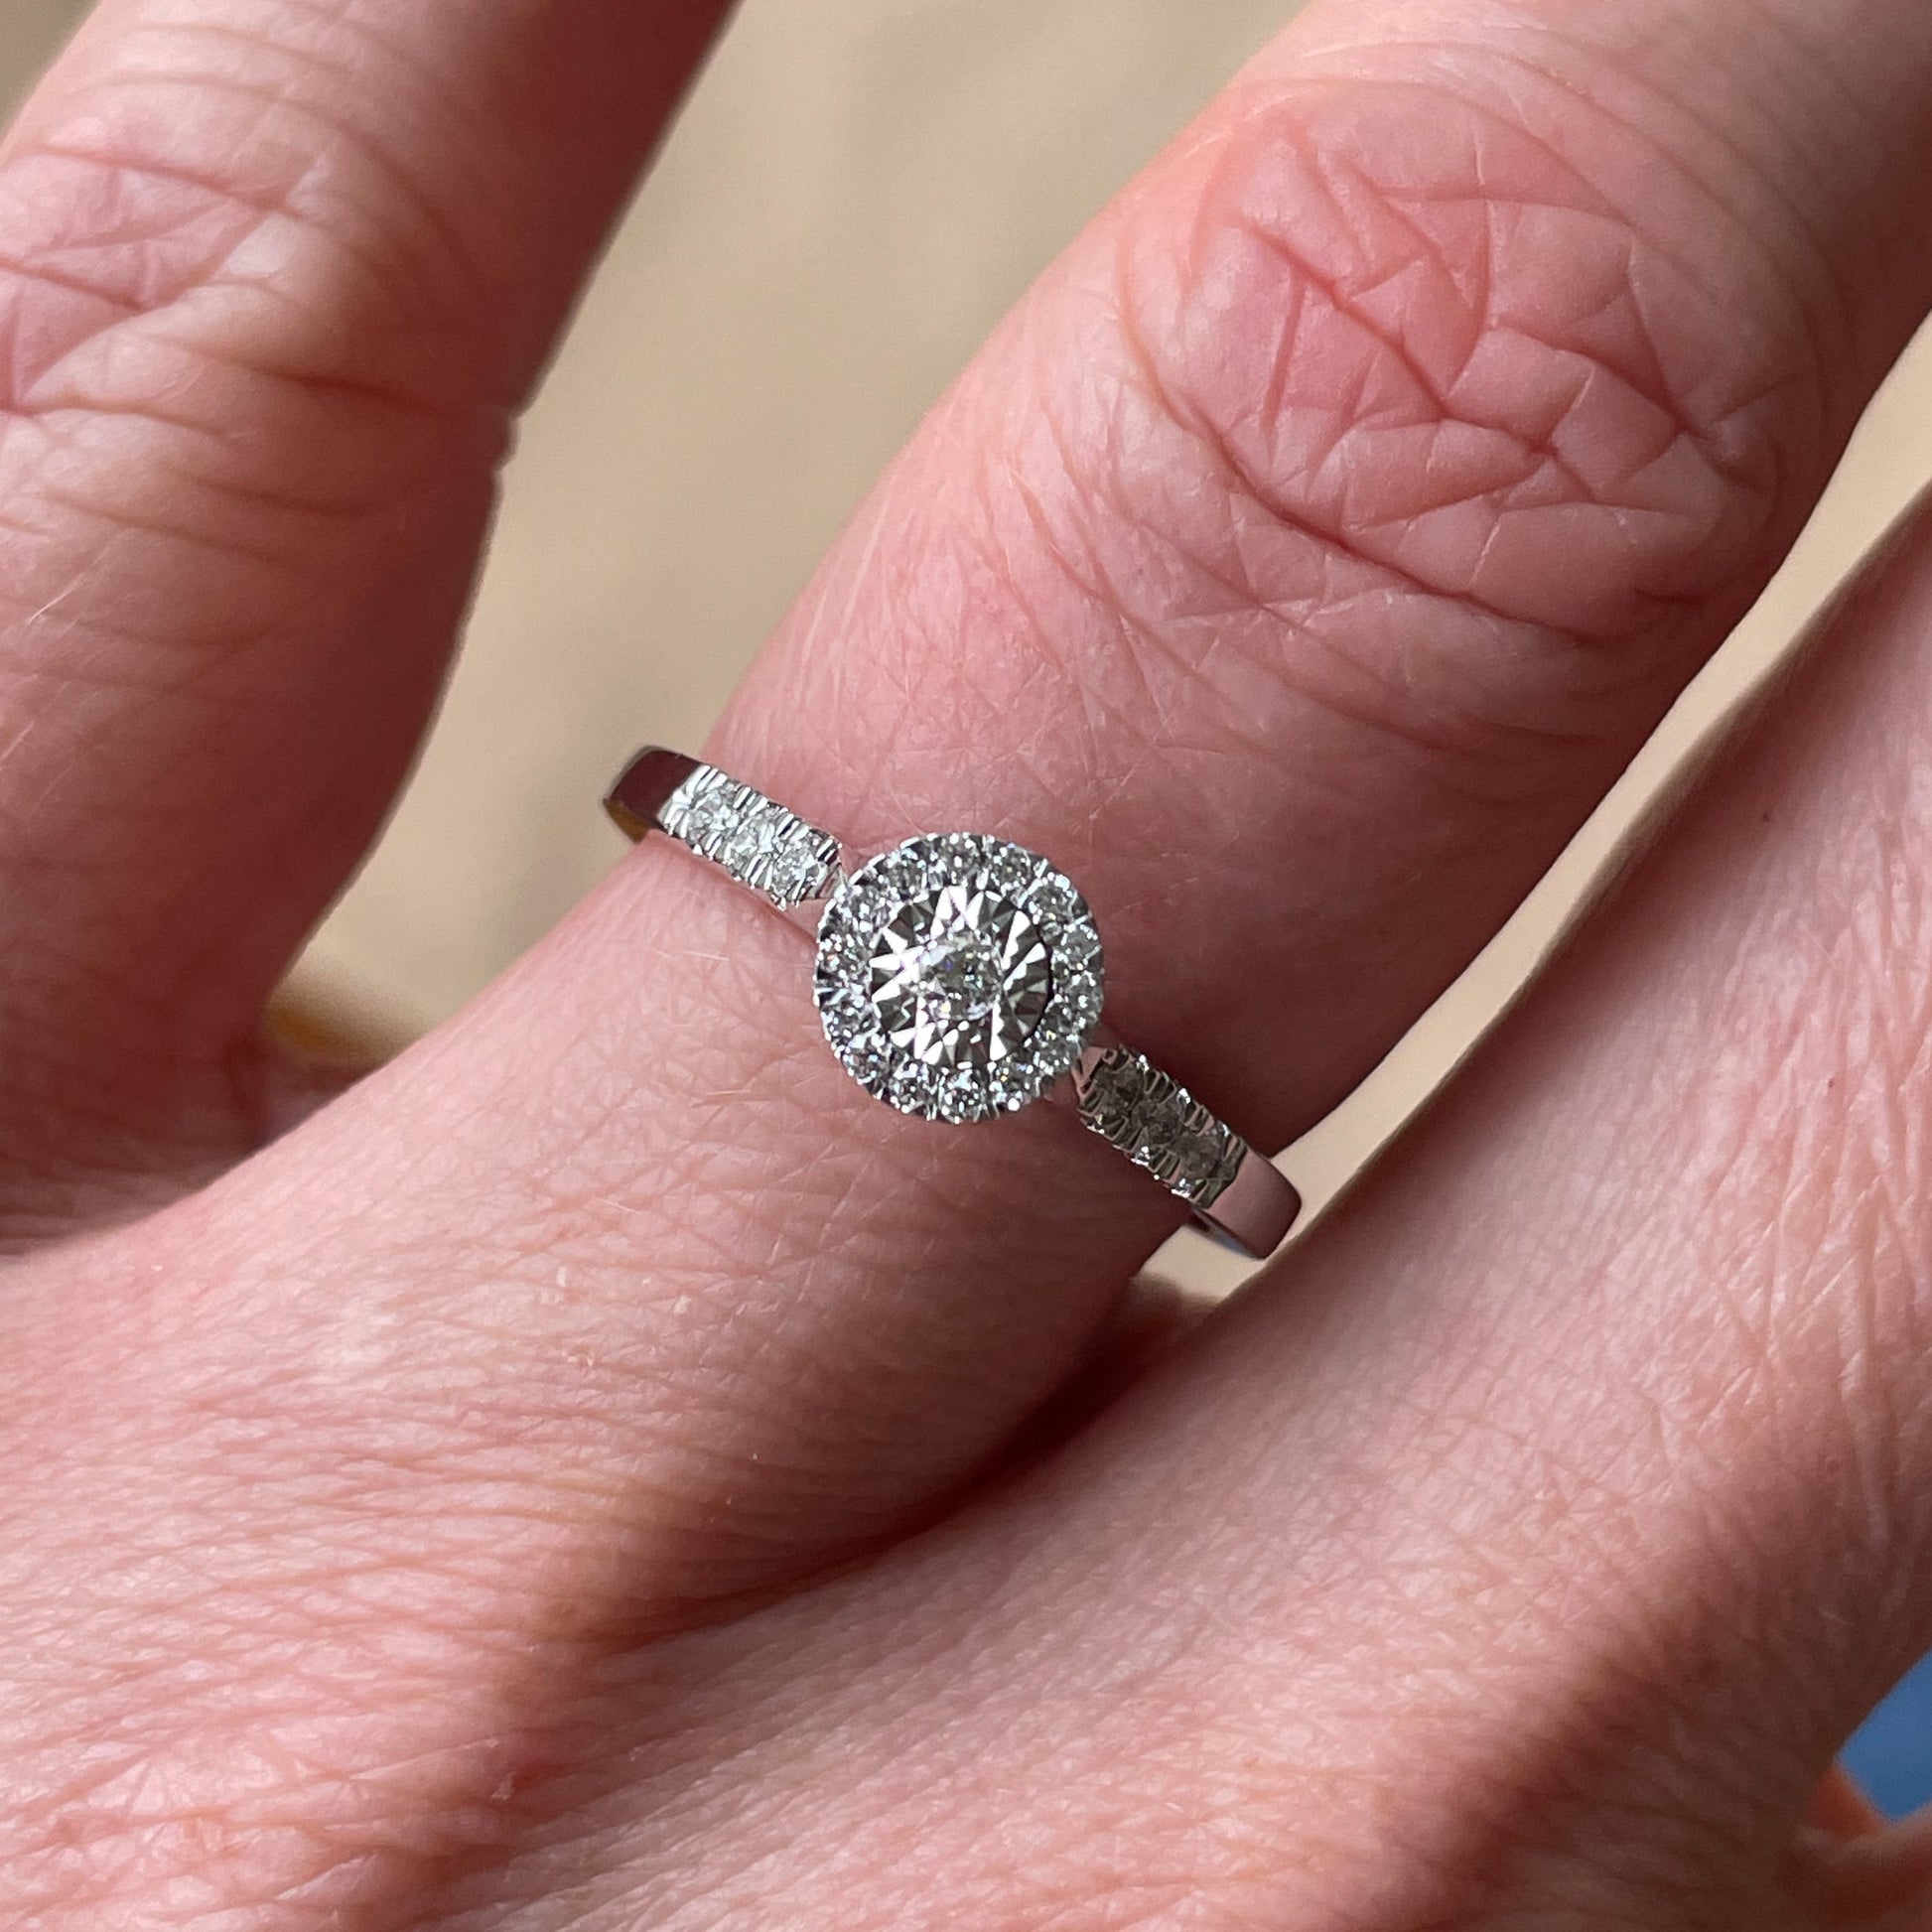 9ct White Gold Diamond Illusion Solitaire Engagement Ring 0.20ct in total approximately   This diamond engagement ring has diamond set shoulders.